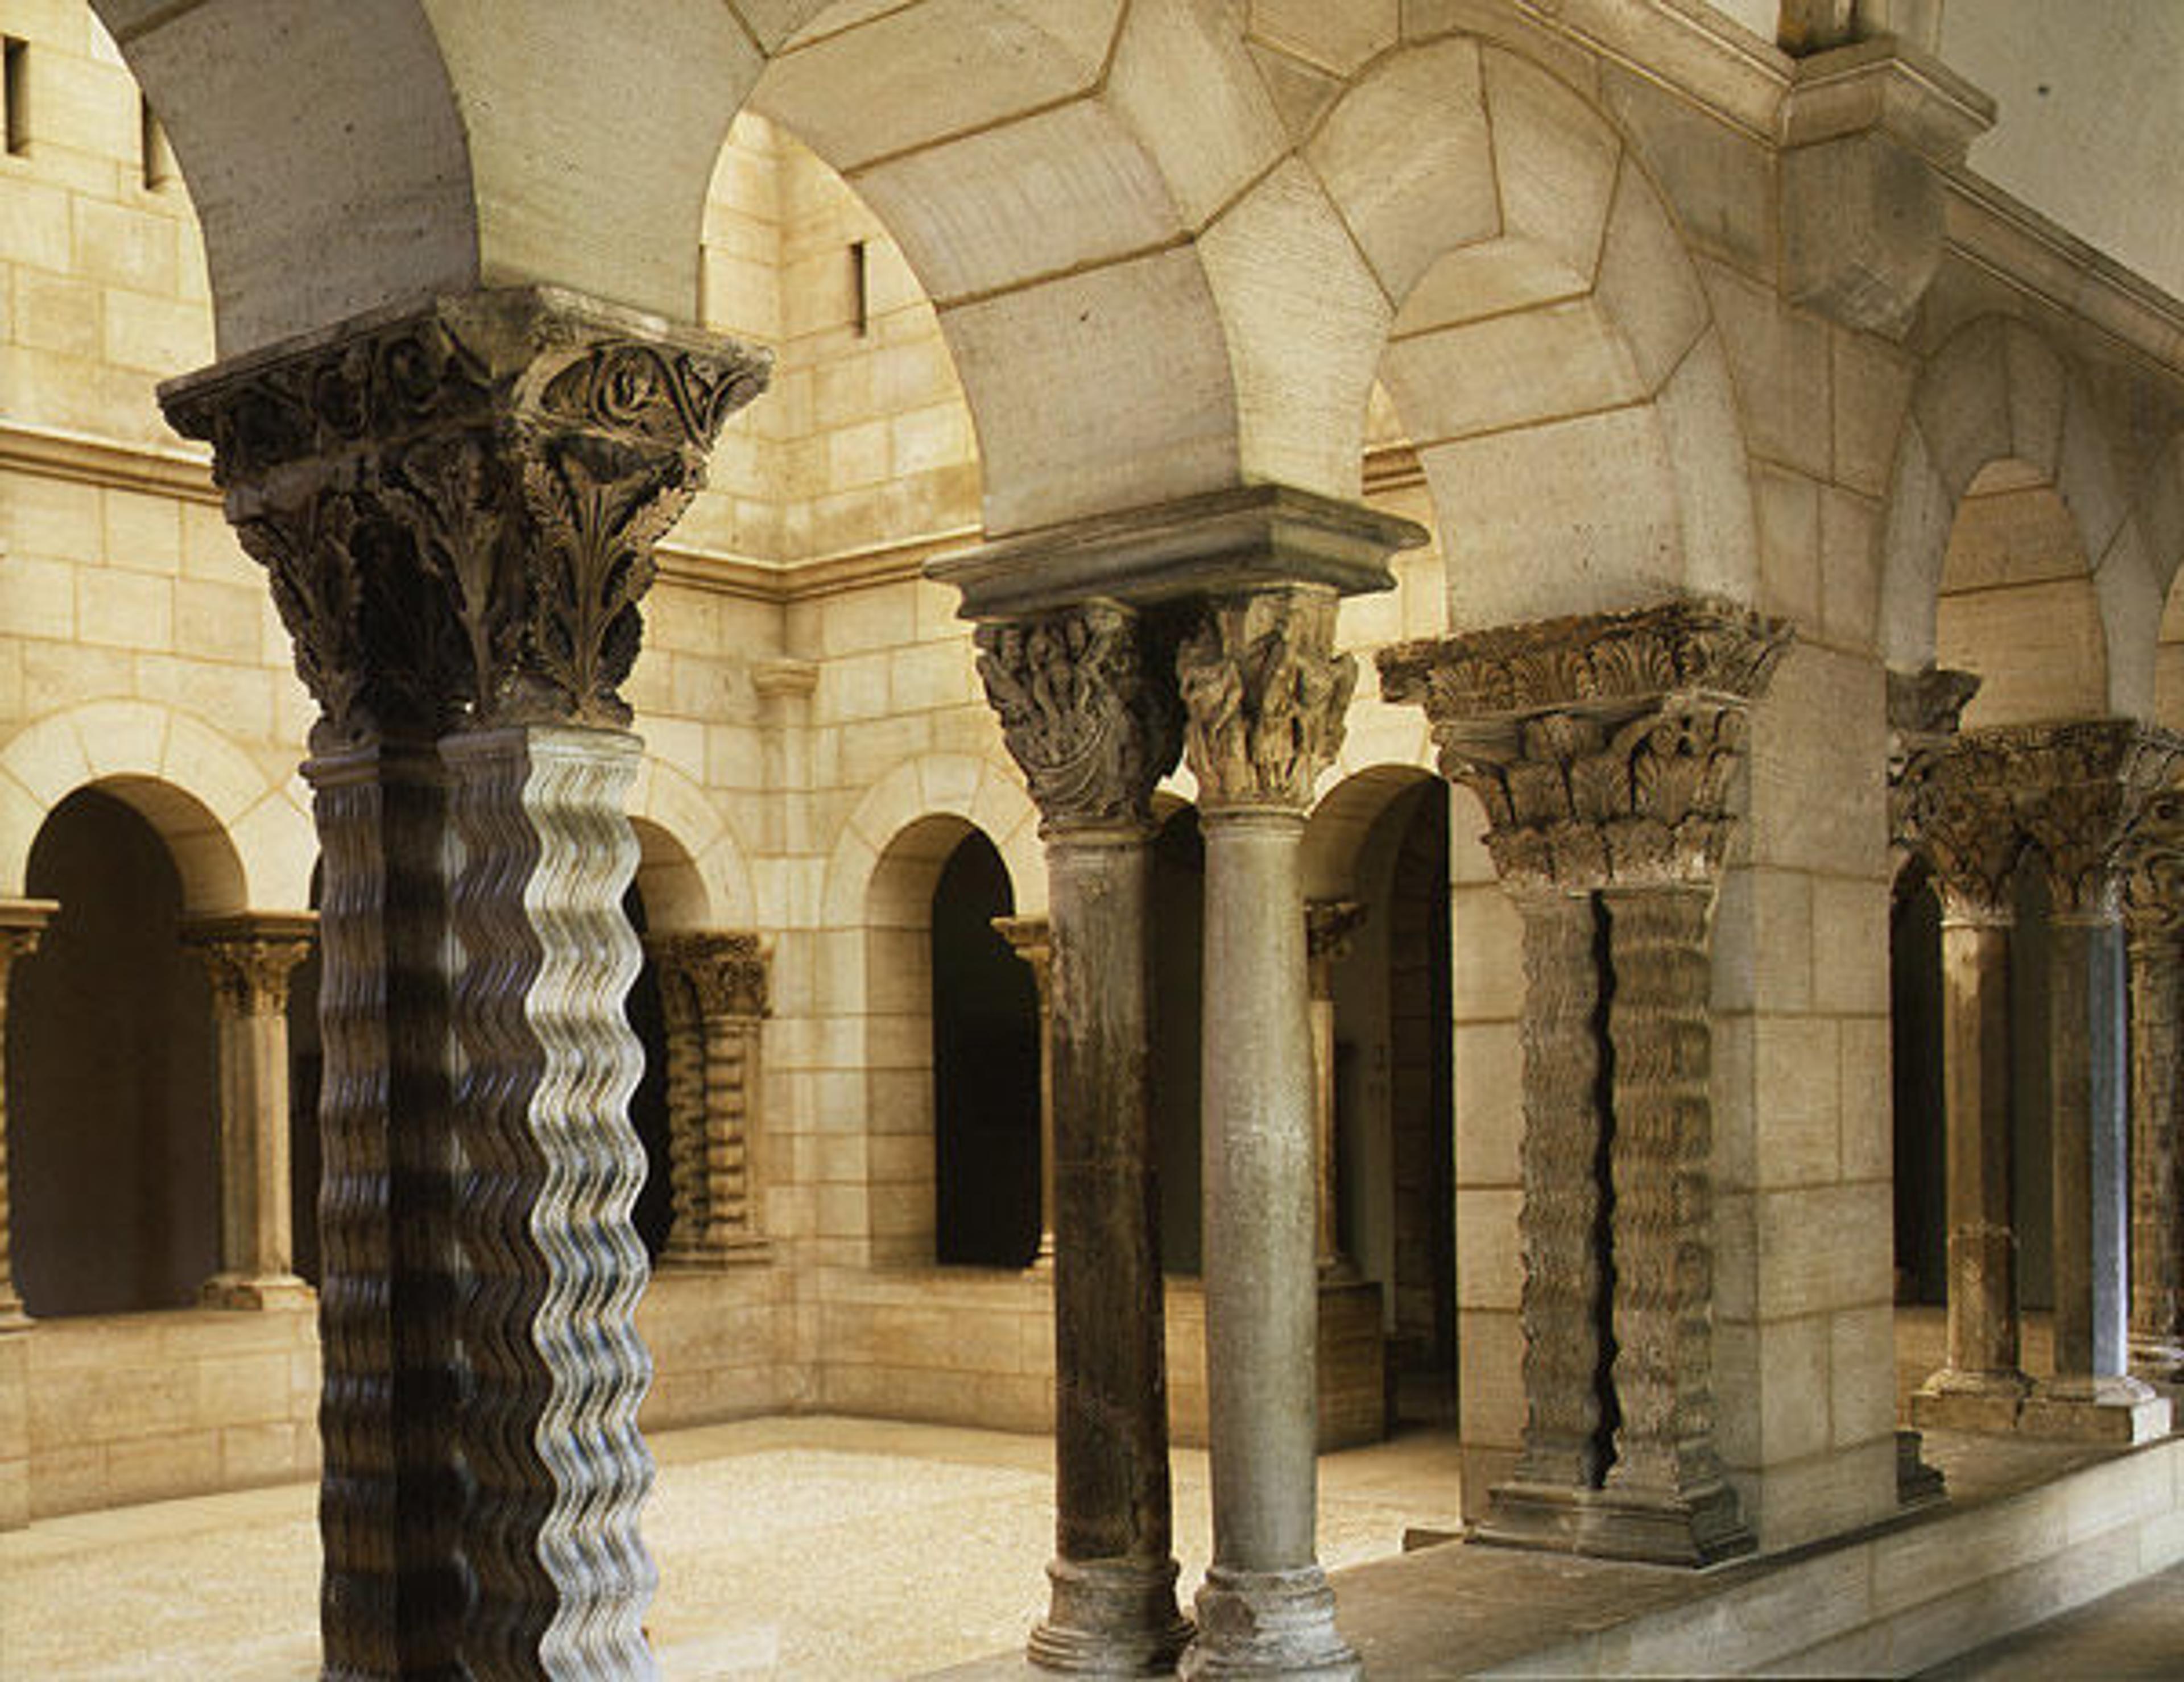 Saint-Guilhem Cloister, late 12th–early 13th century. French. Limestone; 30 ft. 3 in. x 23 ft. 10 in. (922 x 726 cm). The Metropolitan Museum of Art, New York, The Cloisters Collection, 1925 (25.120.1–.134)